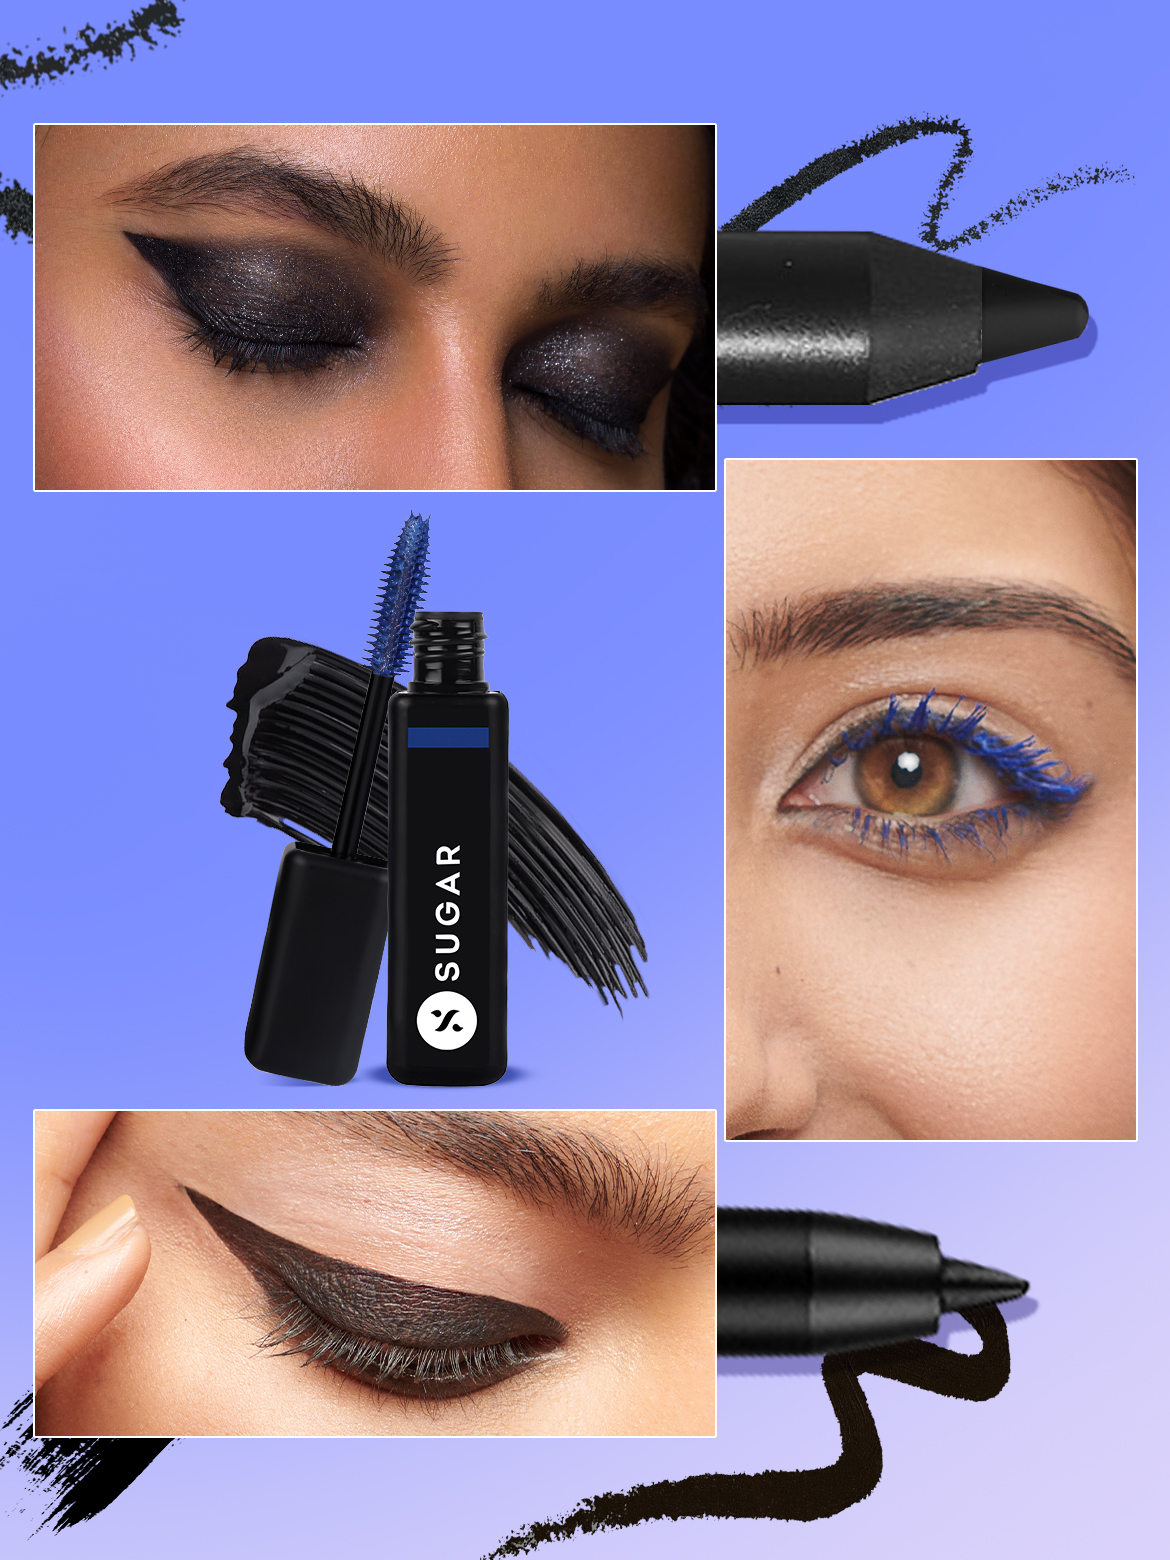 BEST Eye Makeup Products To Try - SUGAR Cosmetics